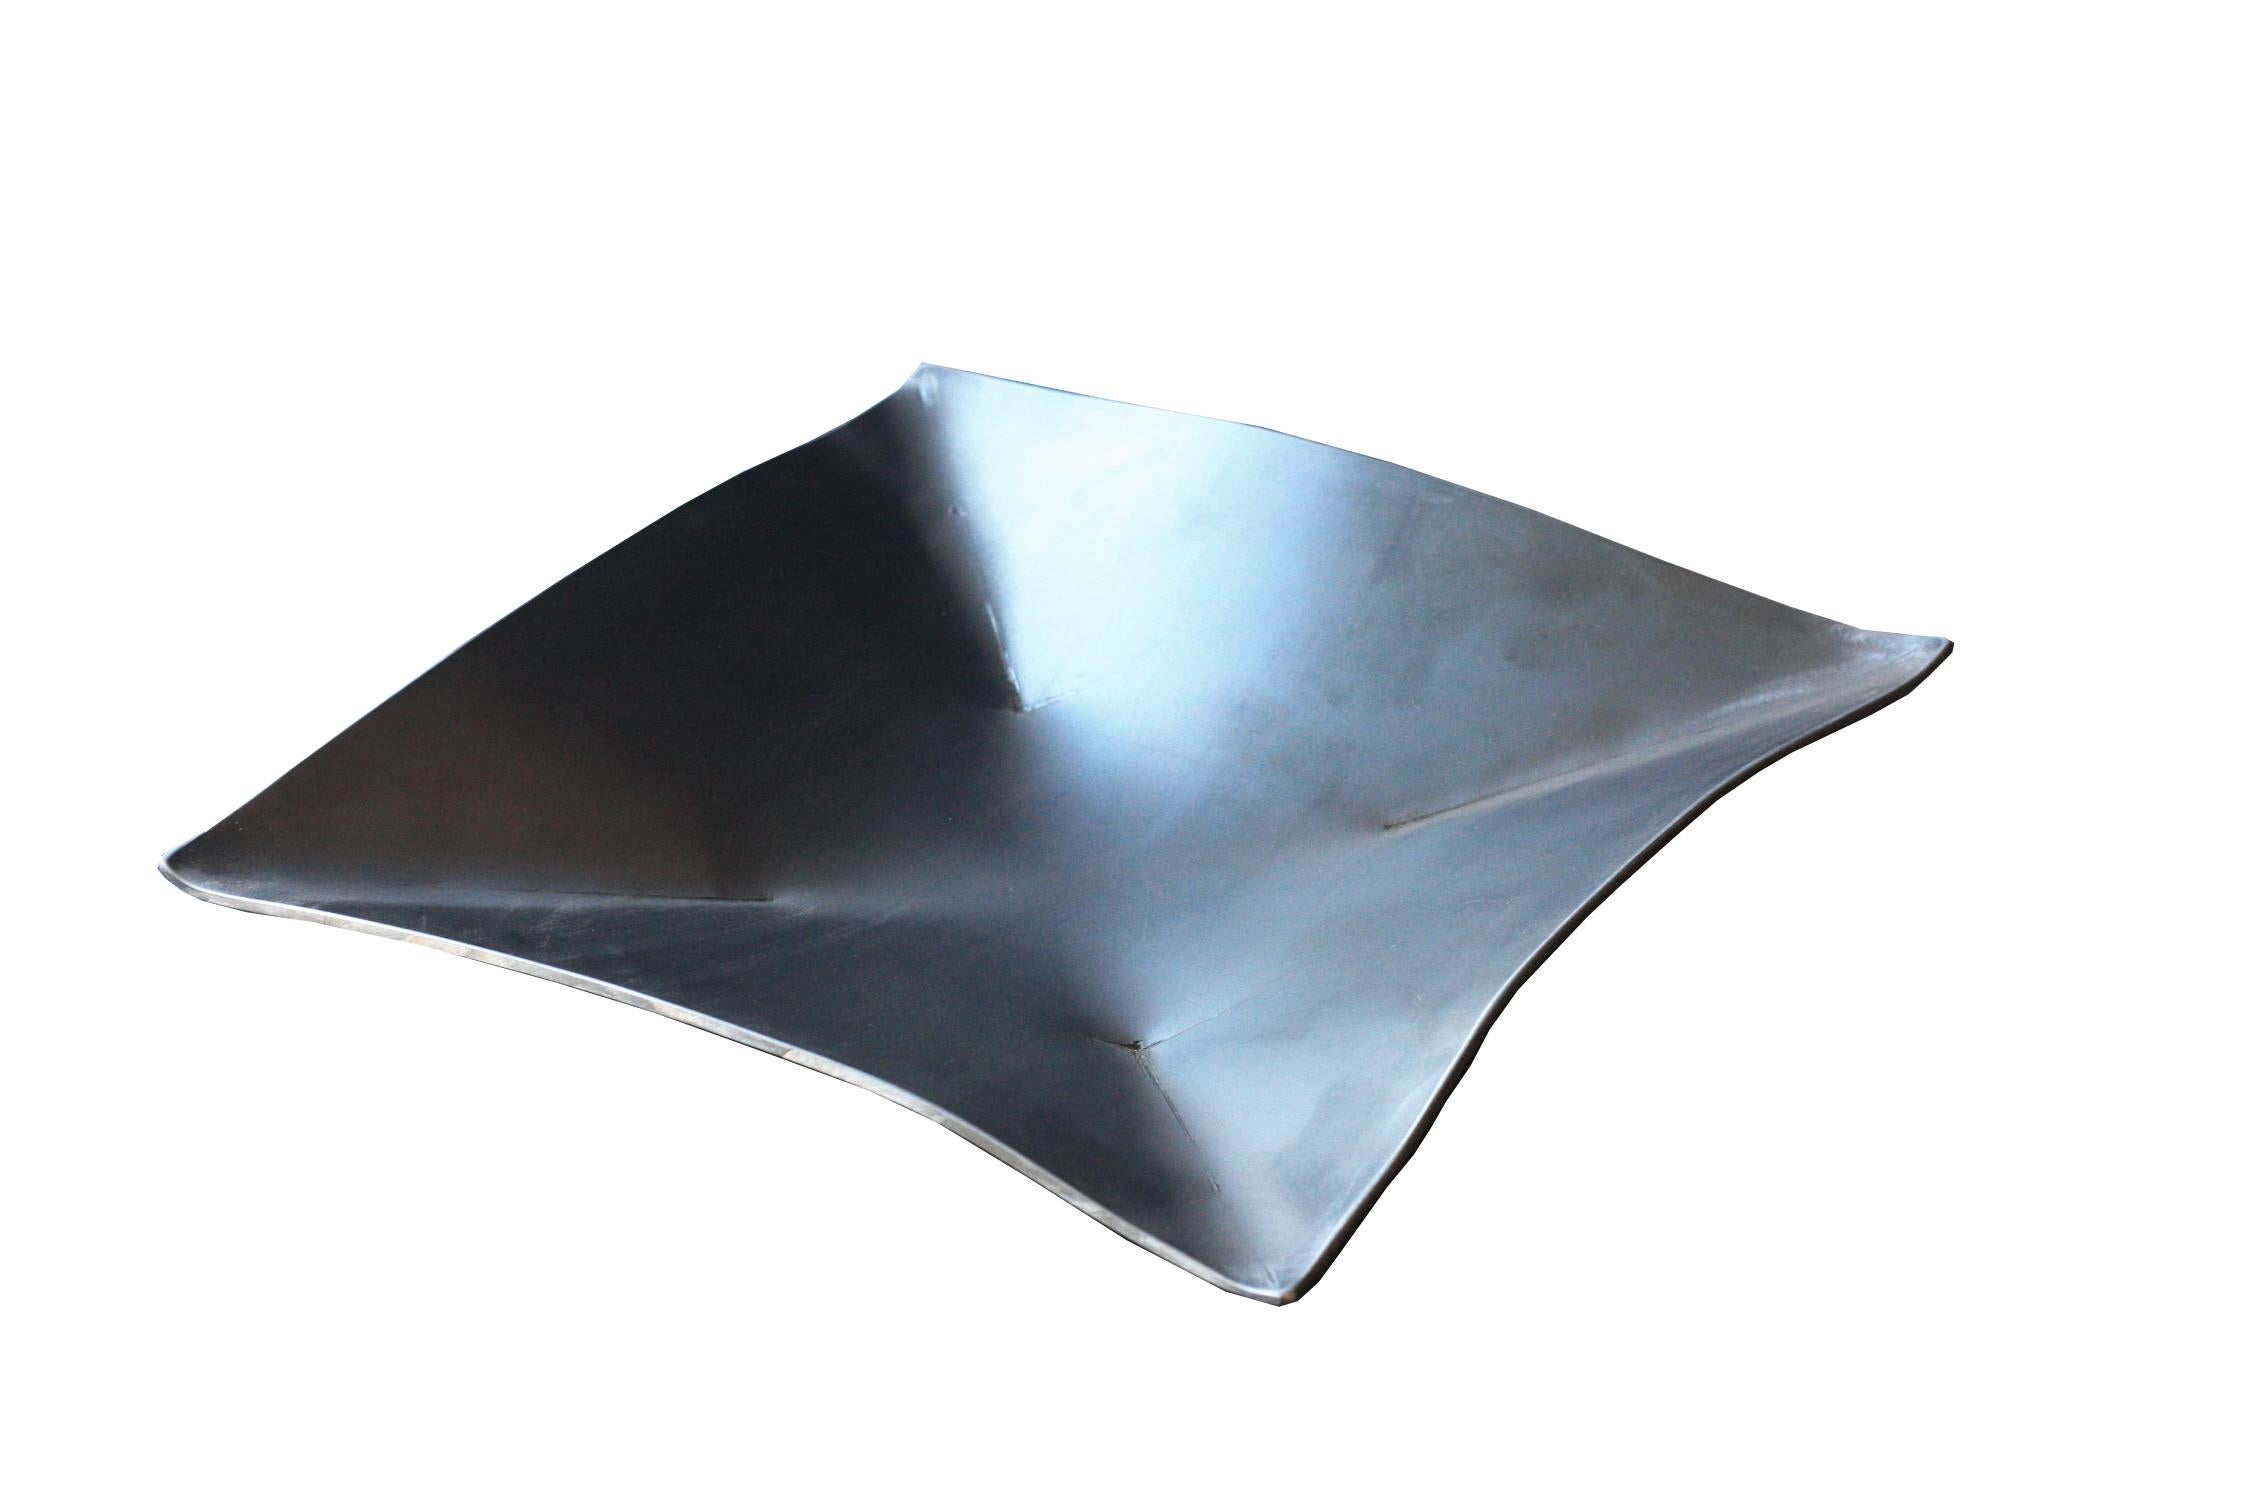 Minimalist Metal Tray in Raw Black Steel, Origami Style, Contemporary Design by MTHARU For Sale